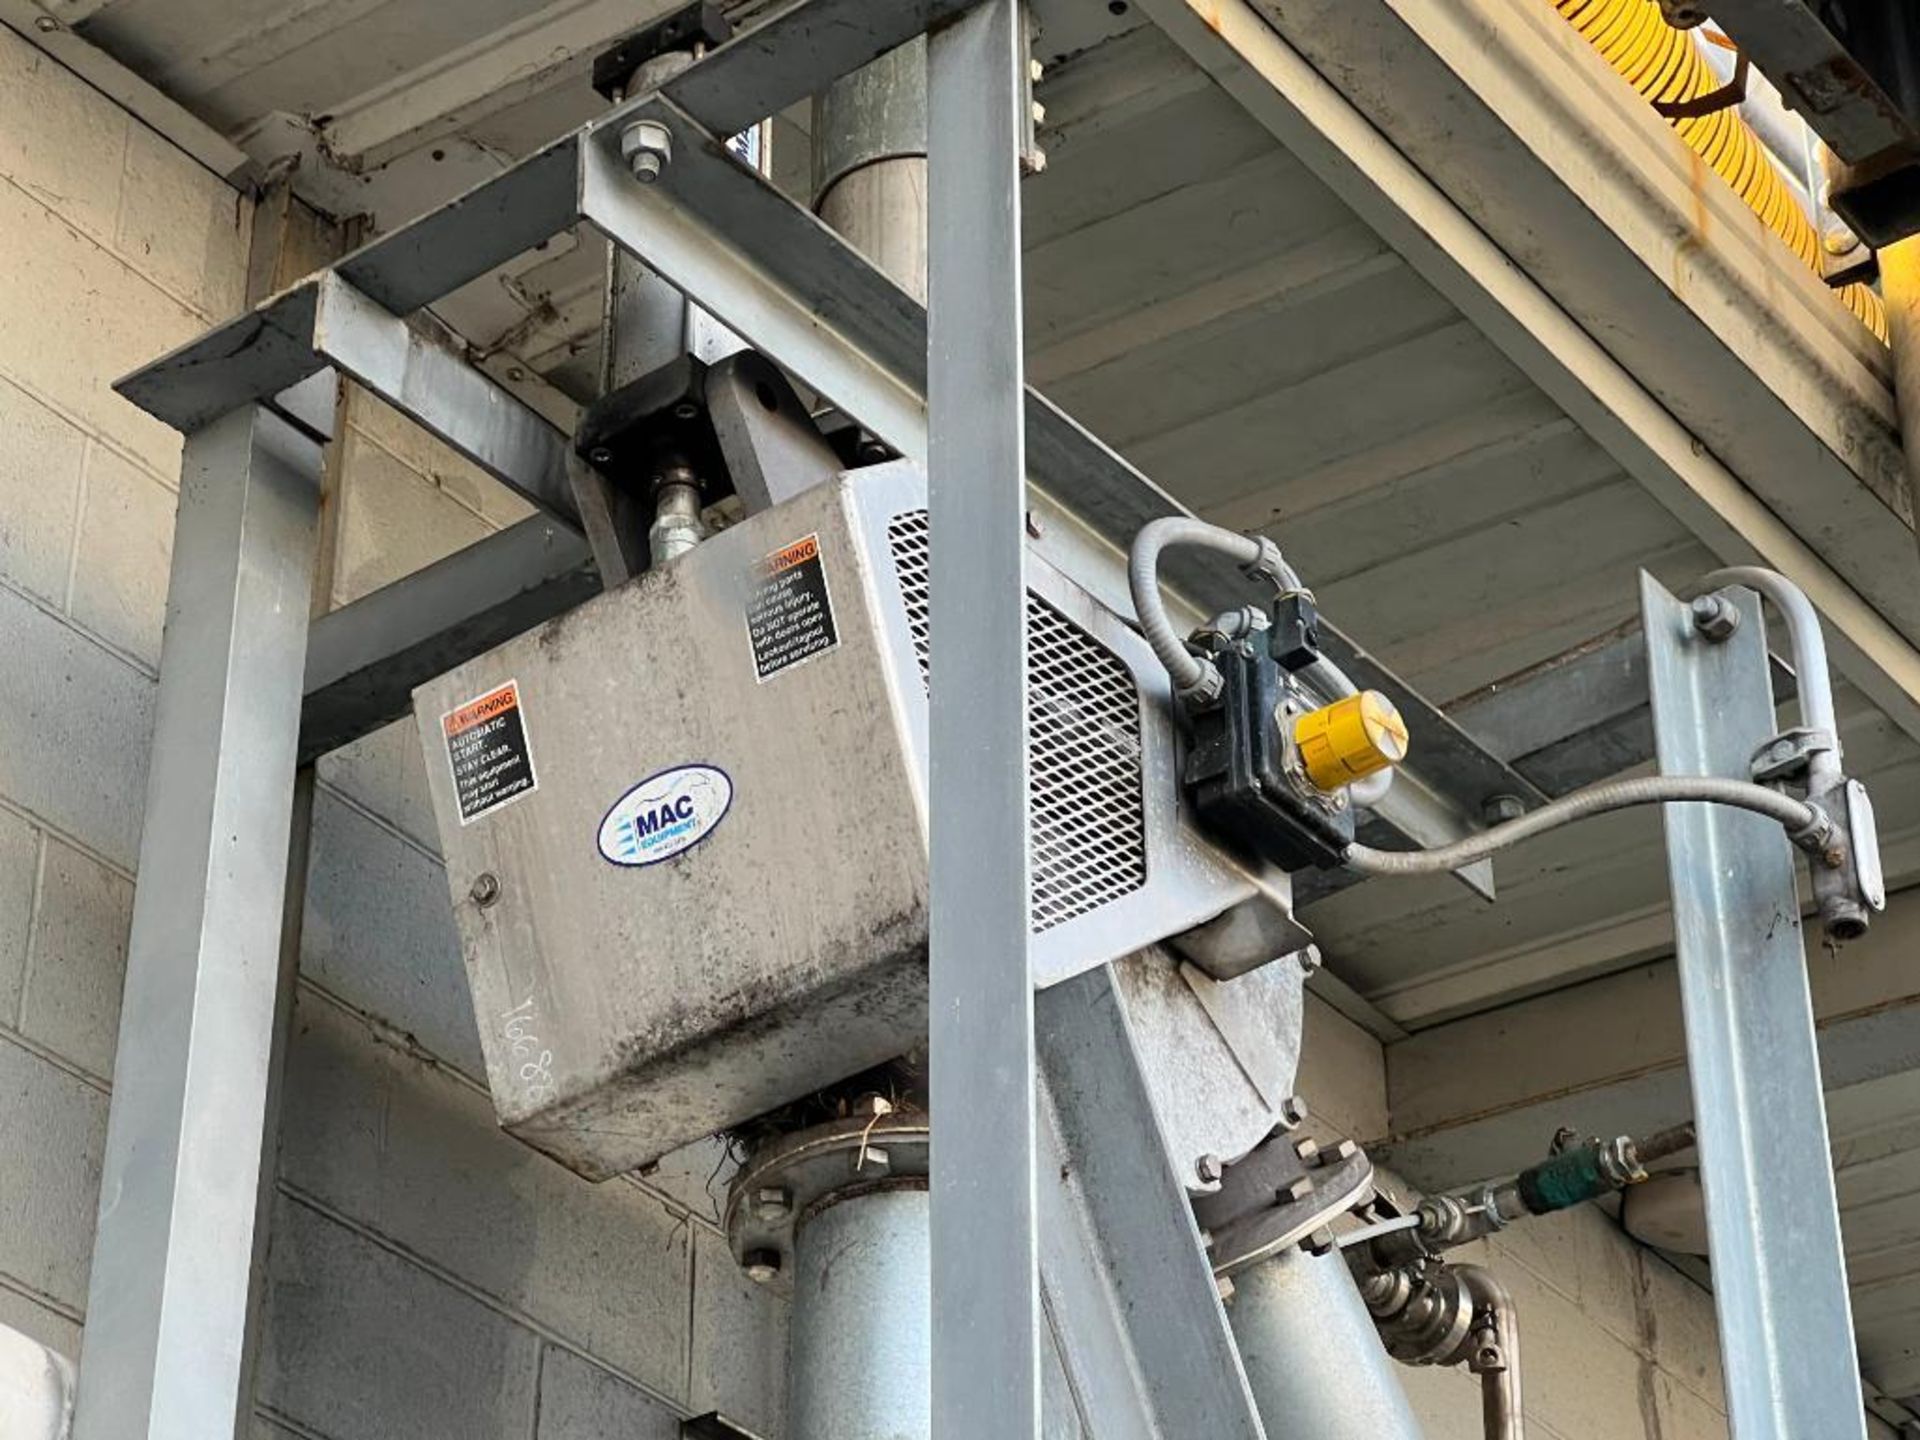 MAC railcar unloading blower system, includes all connected piping, valves, and actuators, no hoses